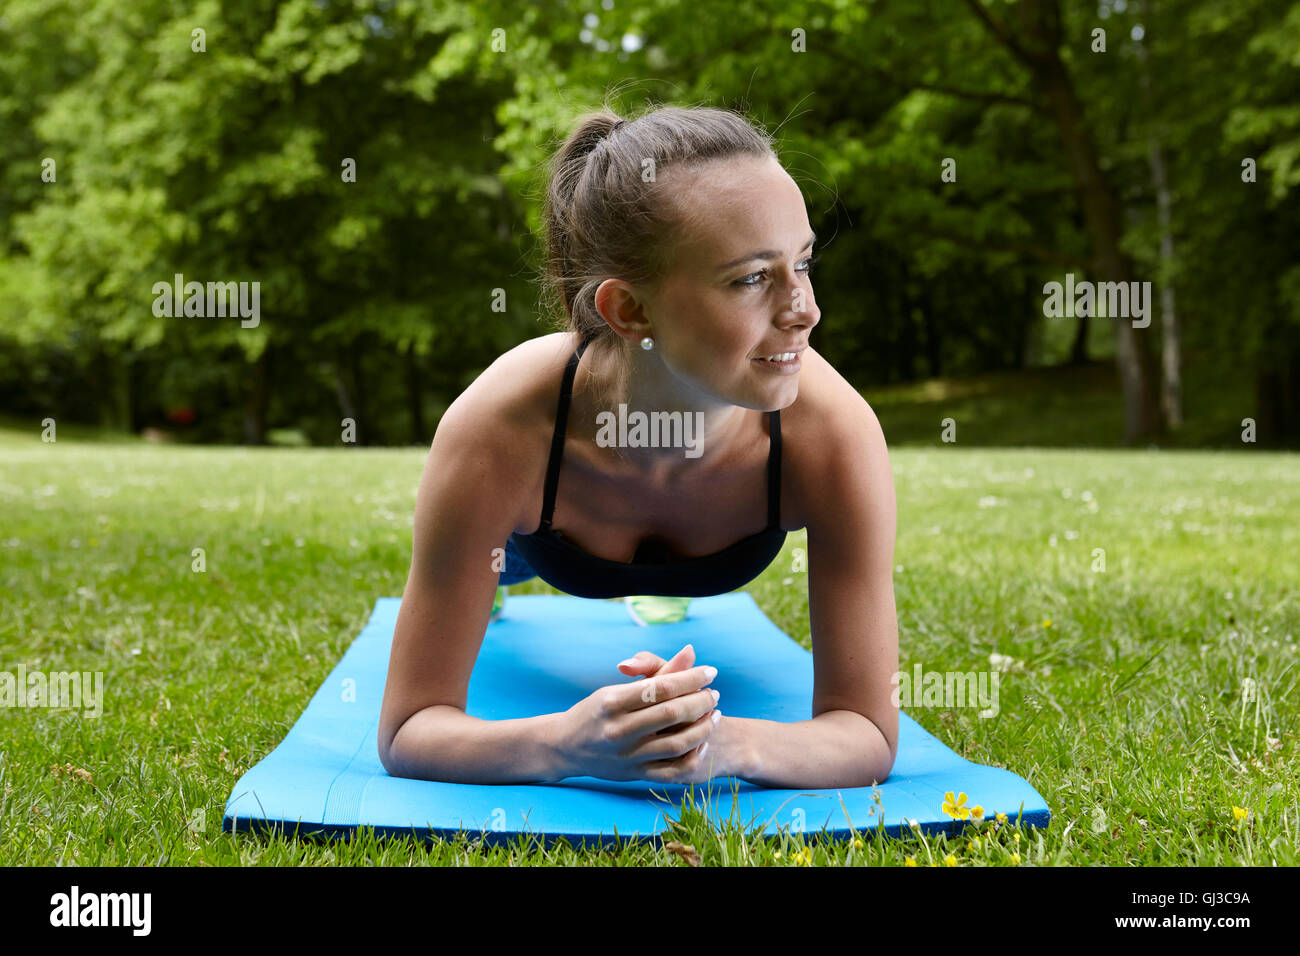 Young woman training in park, doing push ups on exercise mat Stock Photo